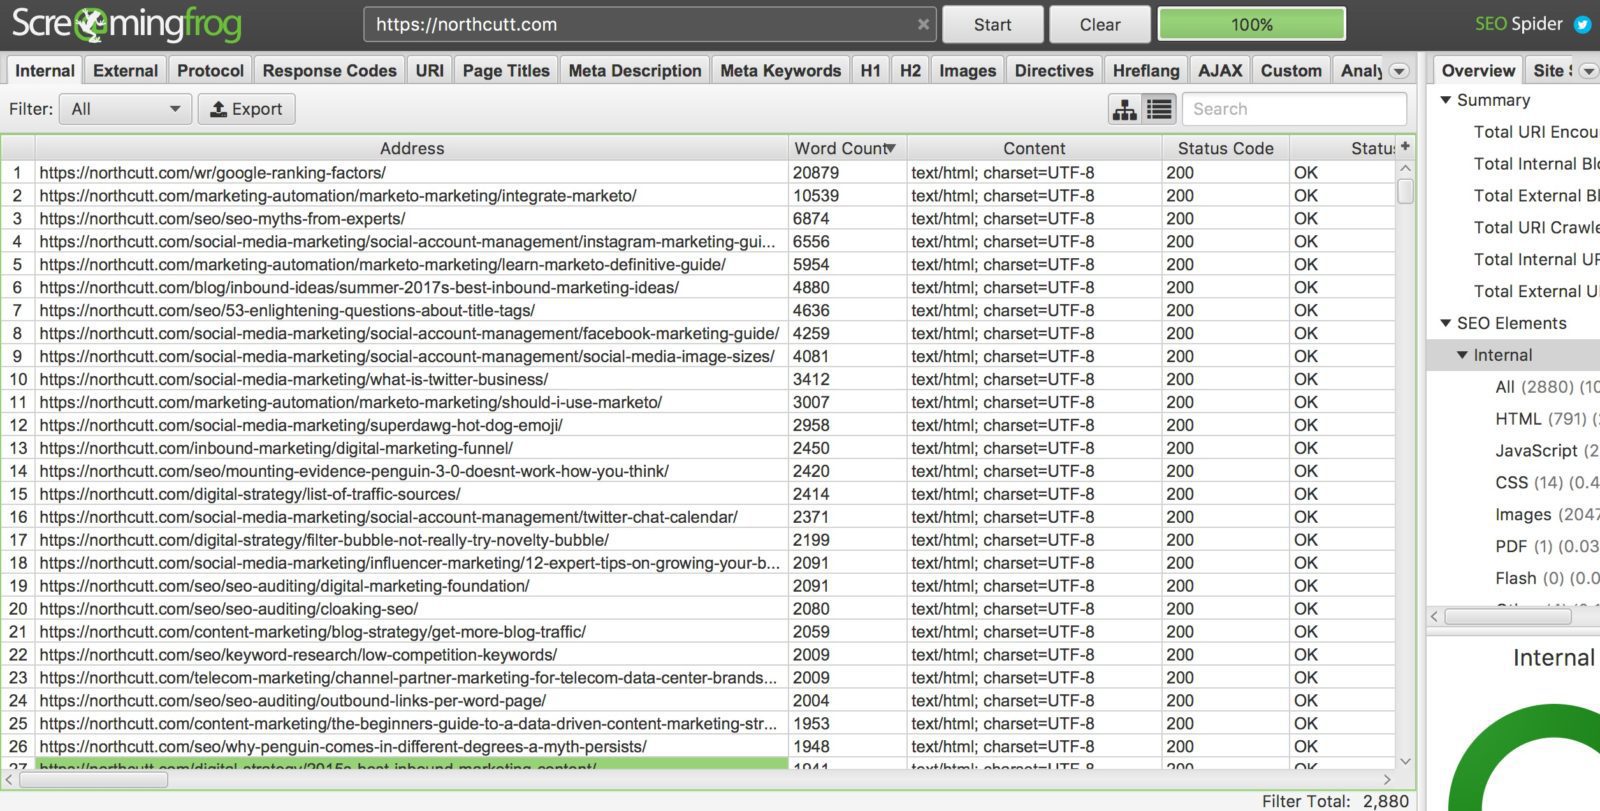 Screenshot of screaming frog seo spider tool analyzing various urls showing response codes, url address, meta description, word count, and other data.